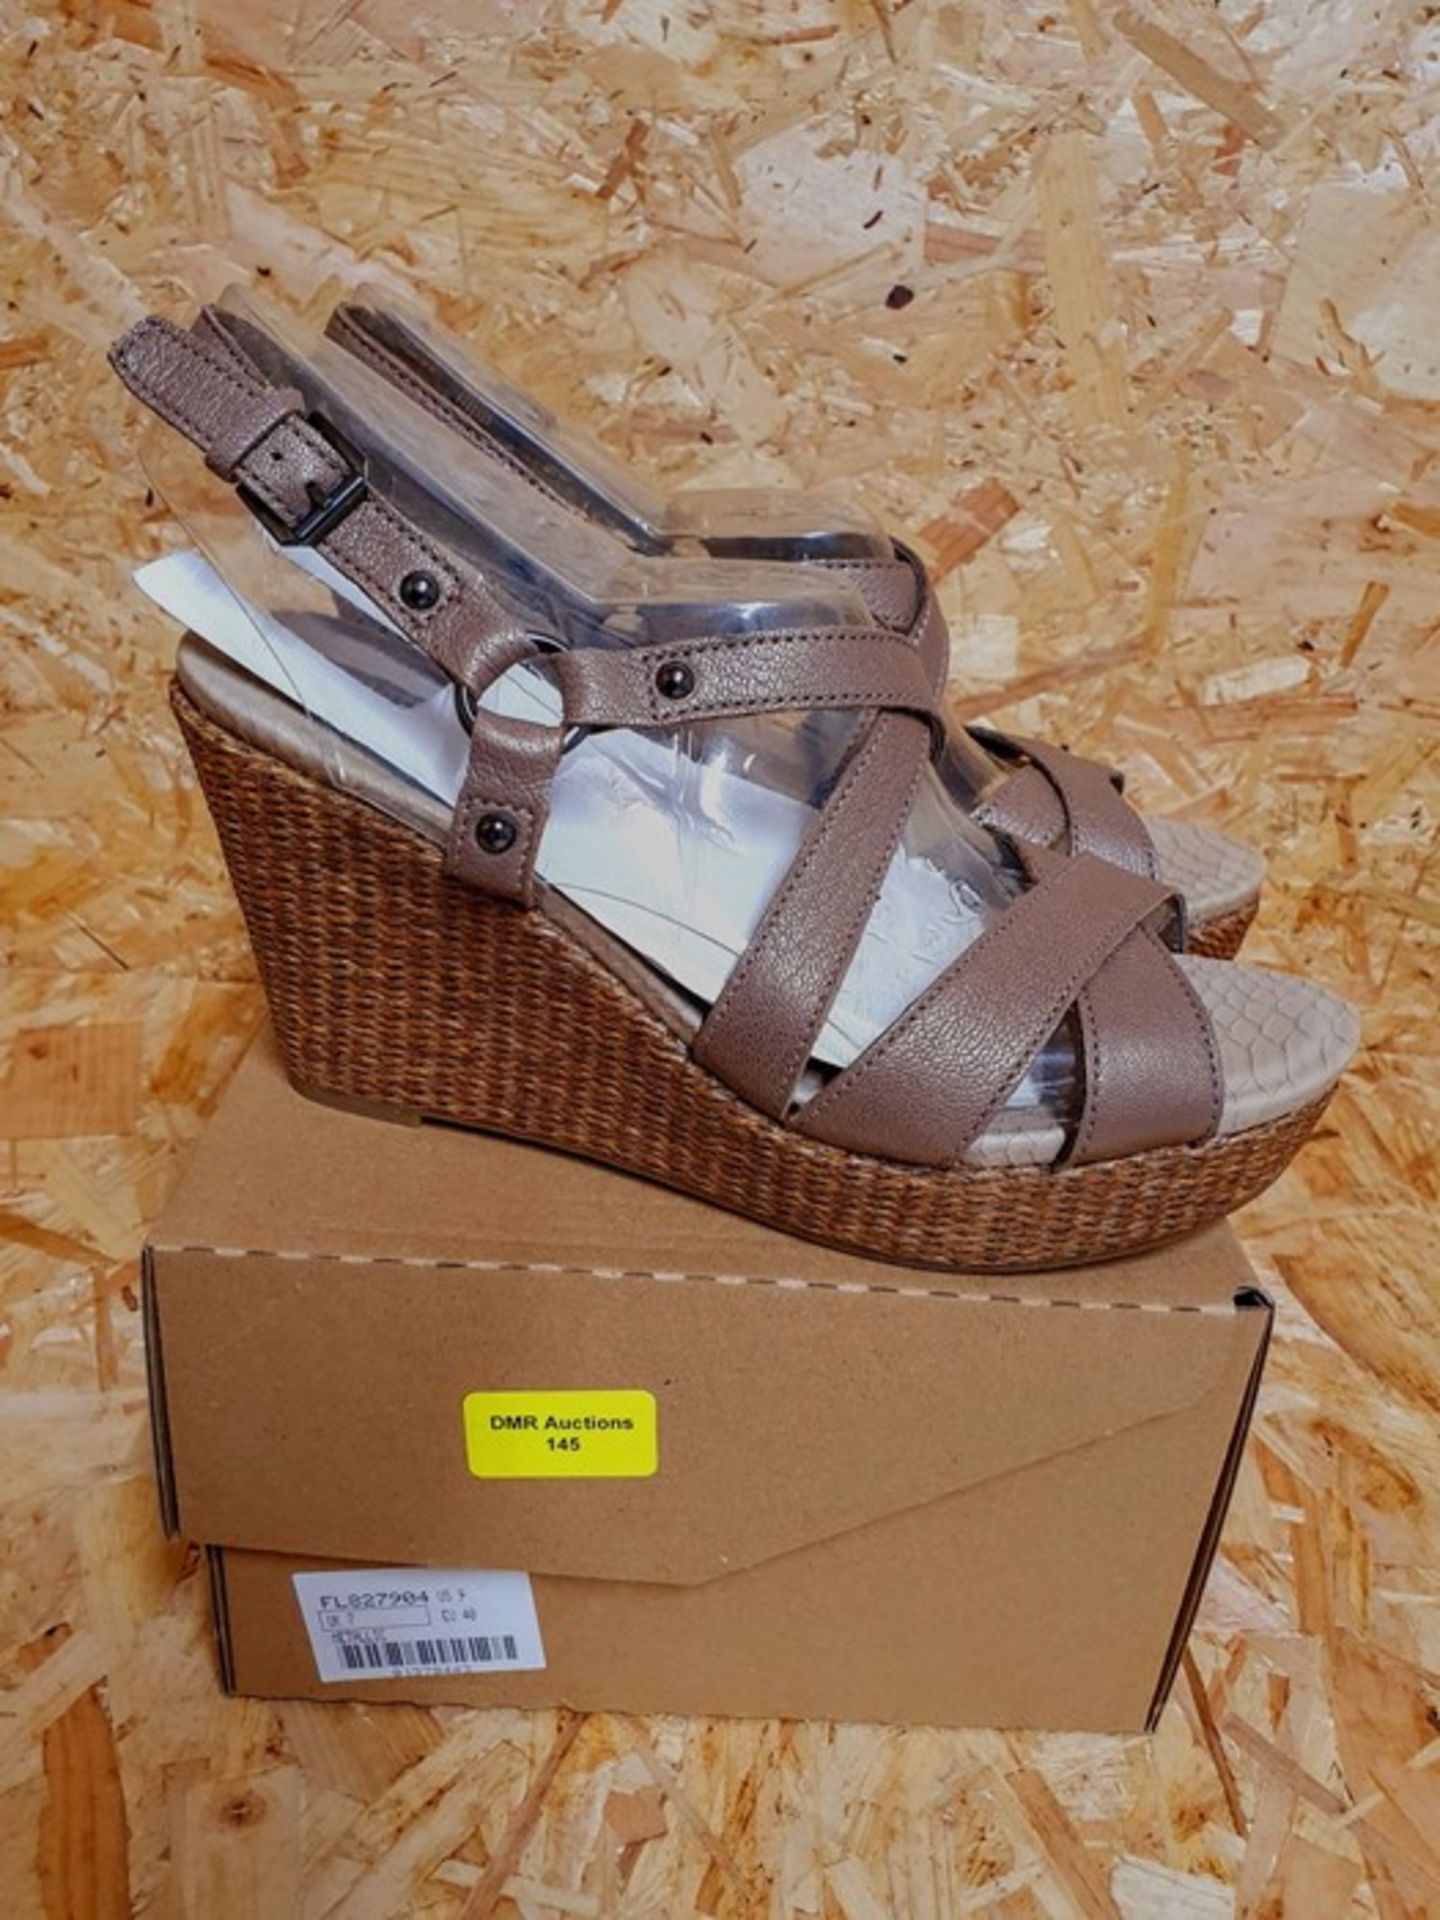 NATURALIZER LADIES HEELED WEDGES - UK SIZE 7/METALLIC GRADE A, BOXED (DUE TO THE LATEST COVID-19